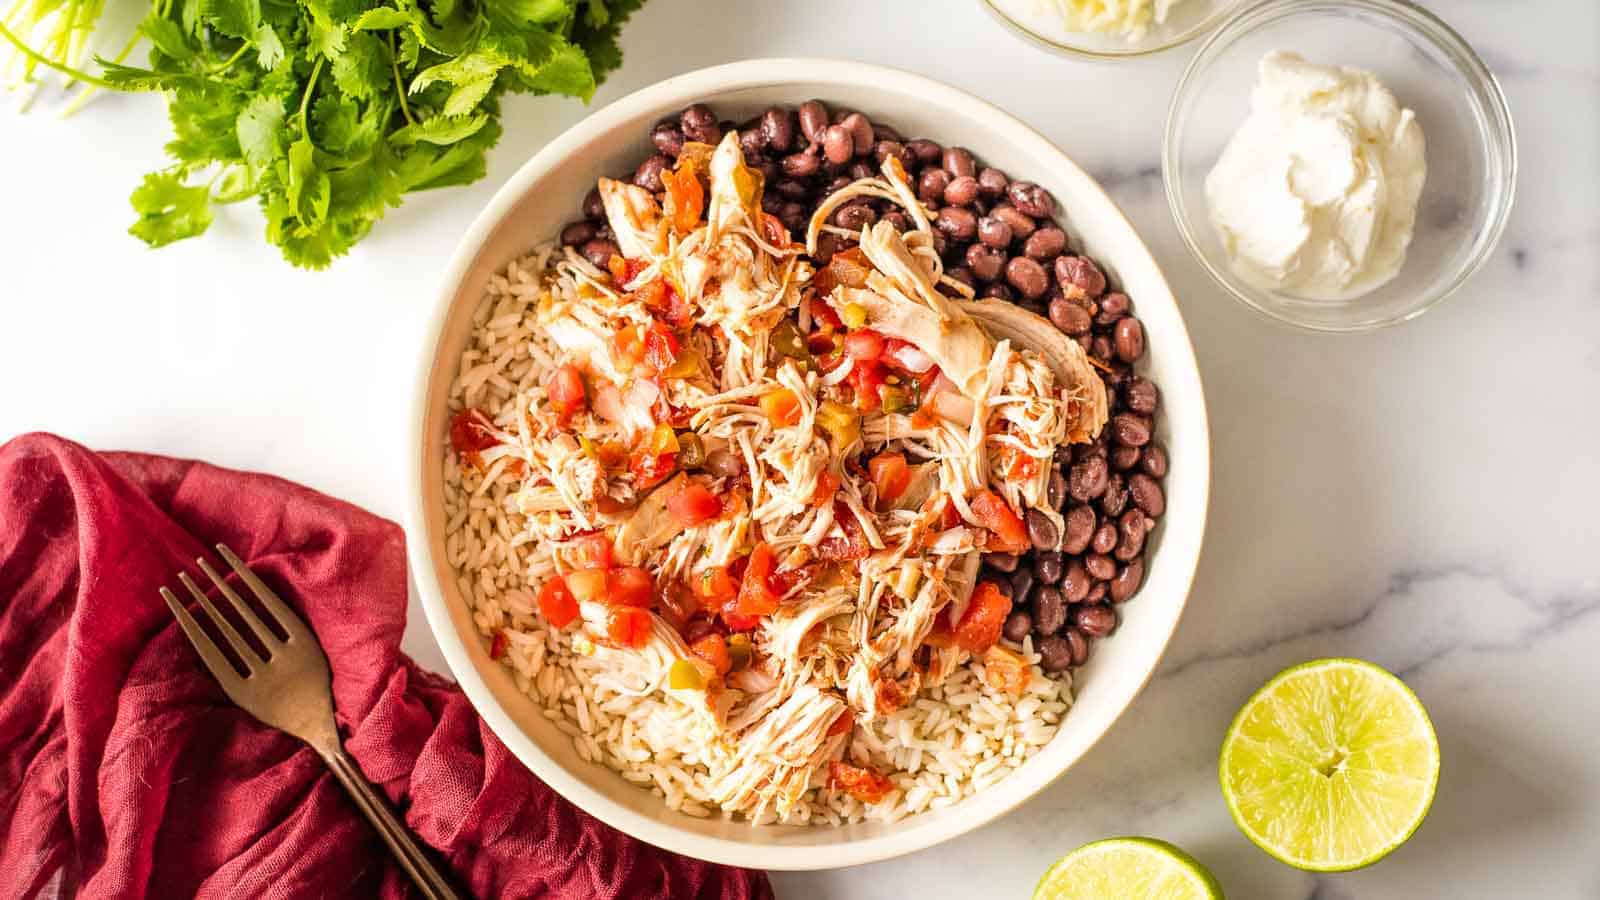 Slow cooker salsa chicken with rice and beans on a plate.